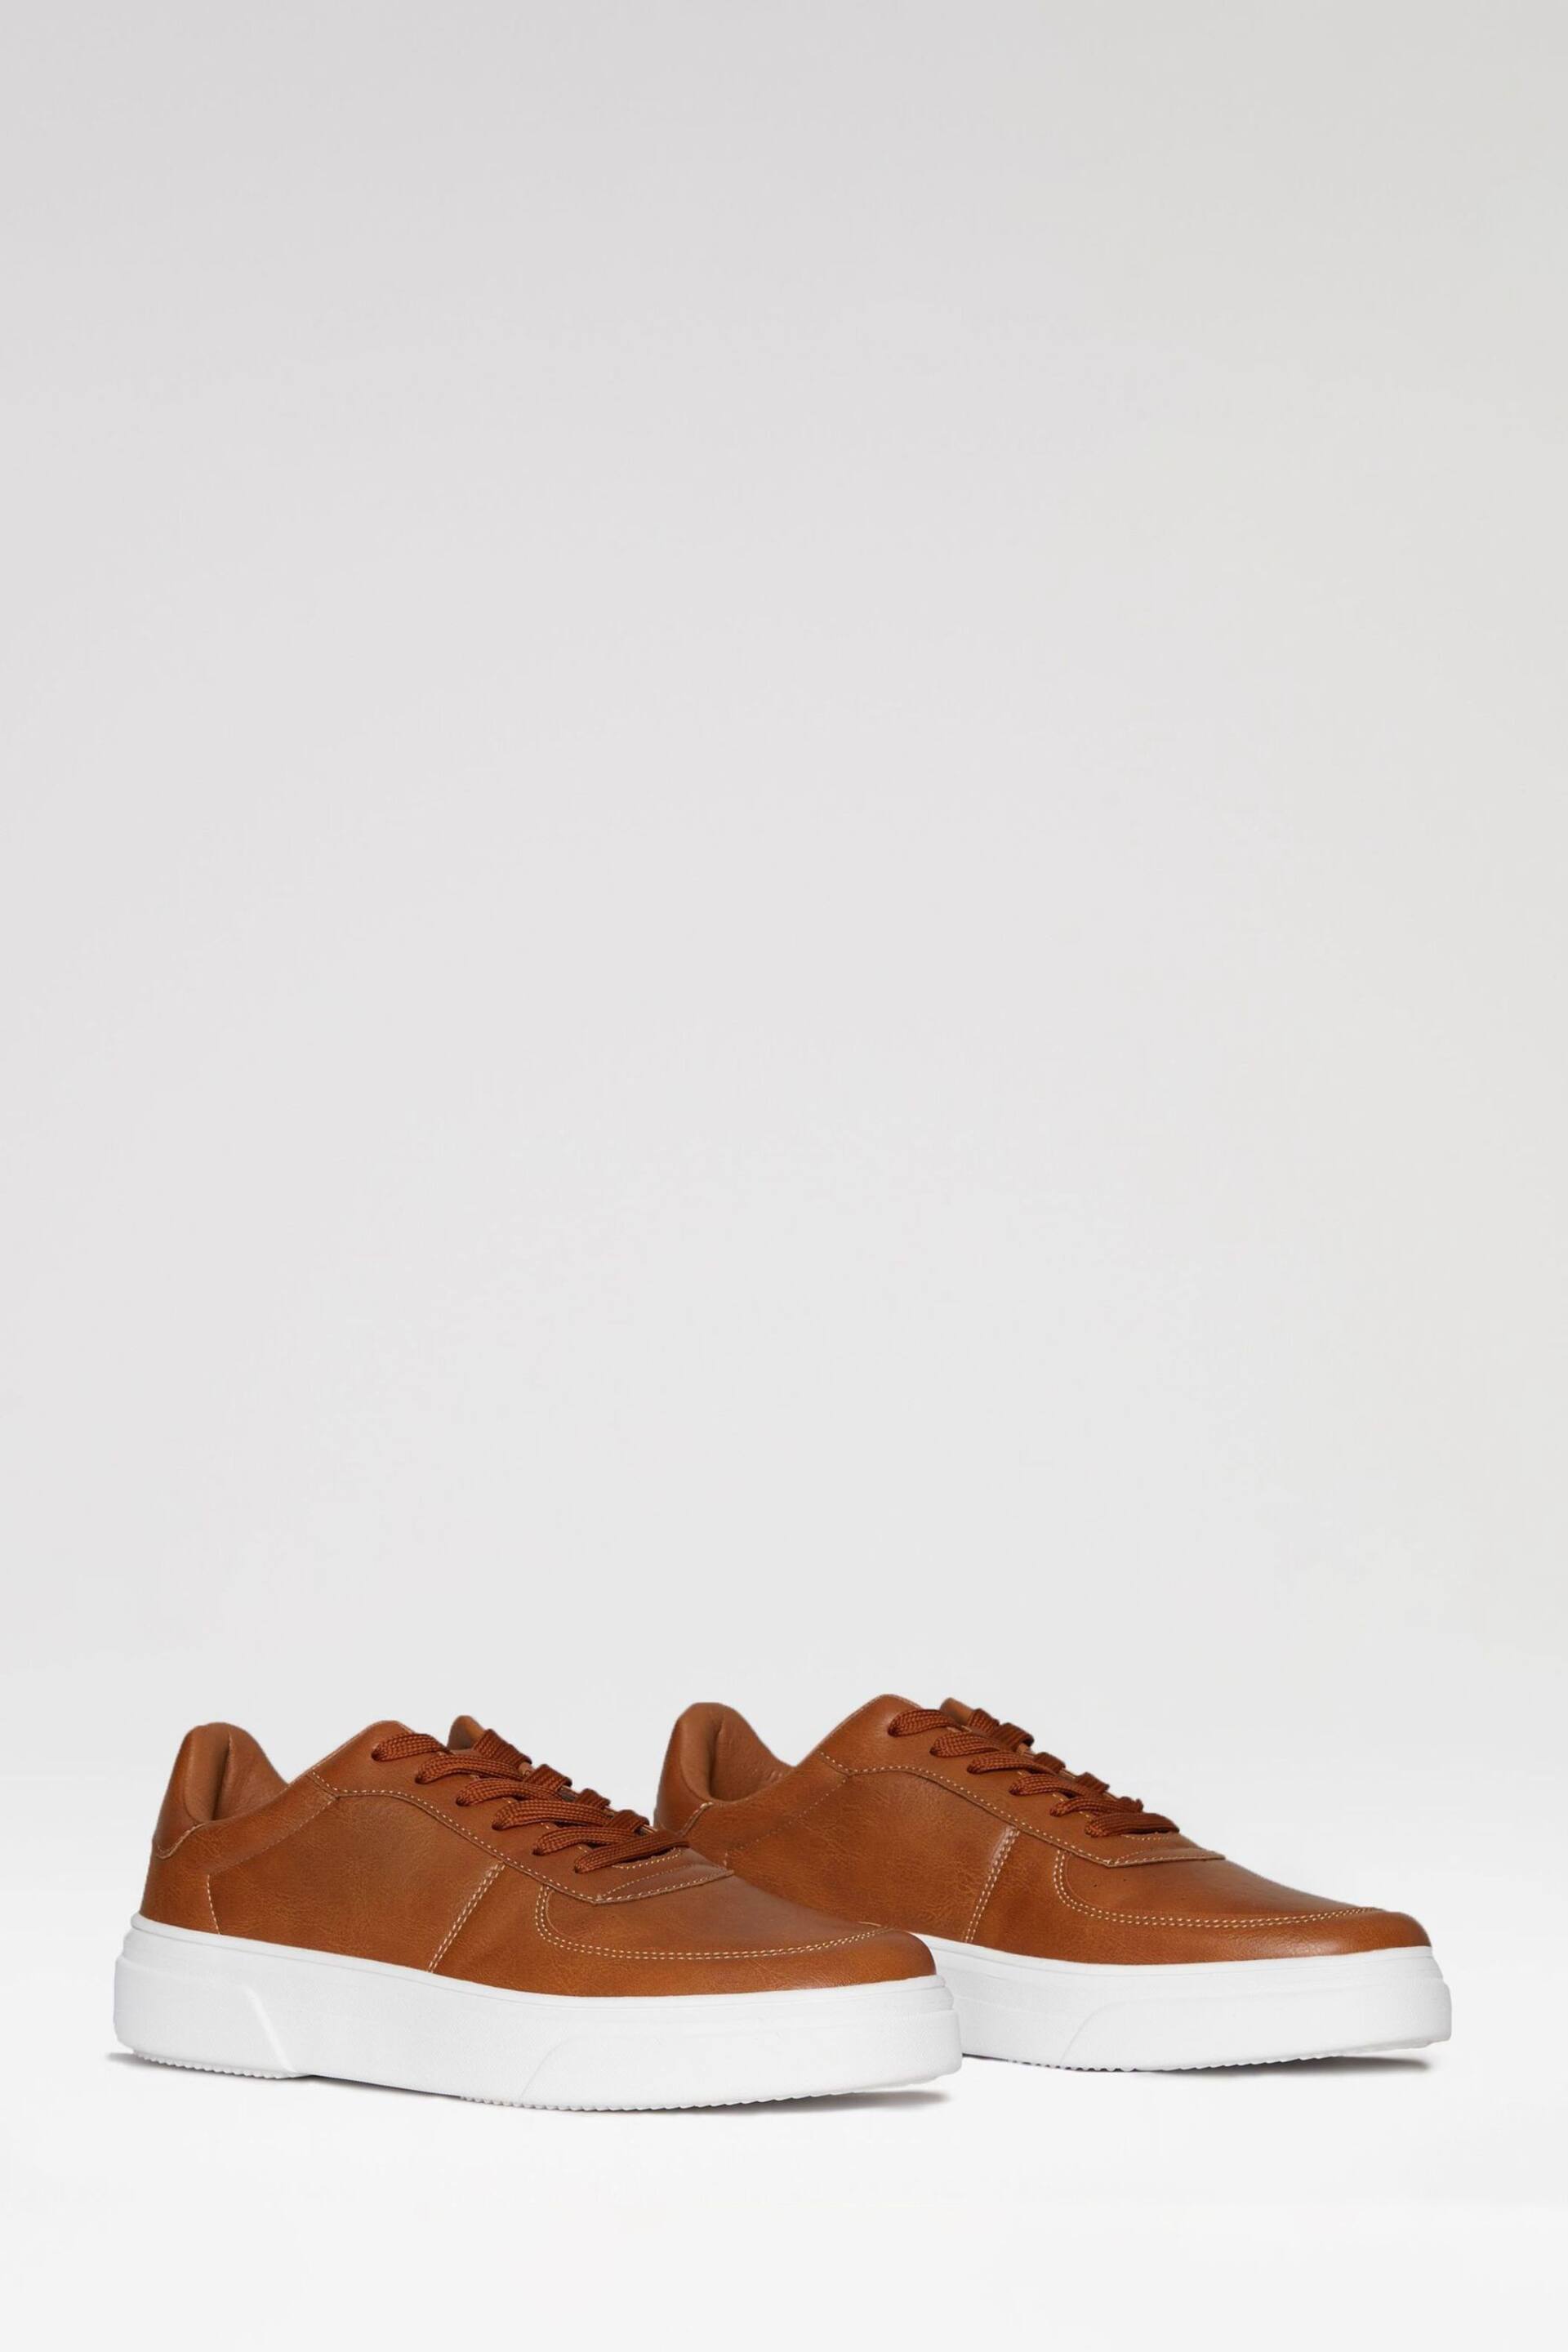 Threadbare Brown Casual Raised Sole Trainers - Image 2 of 4